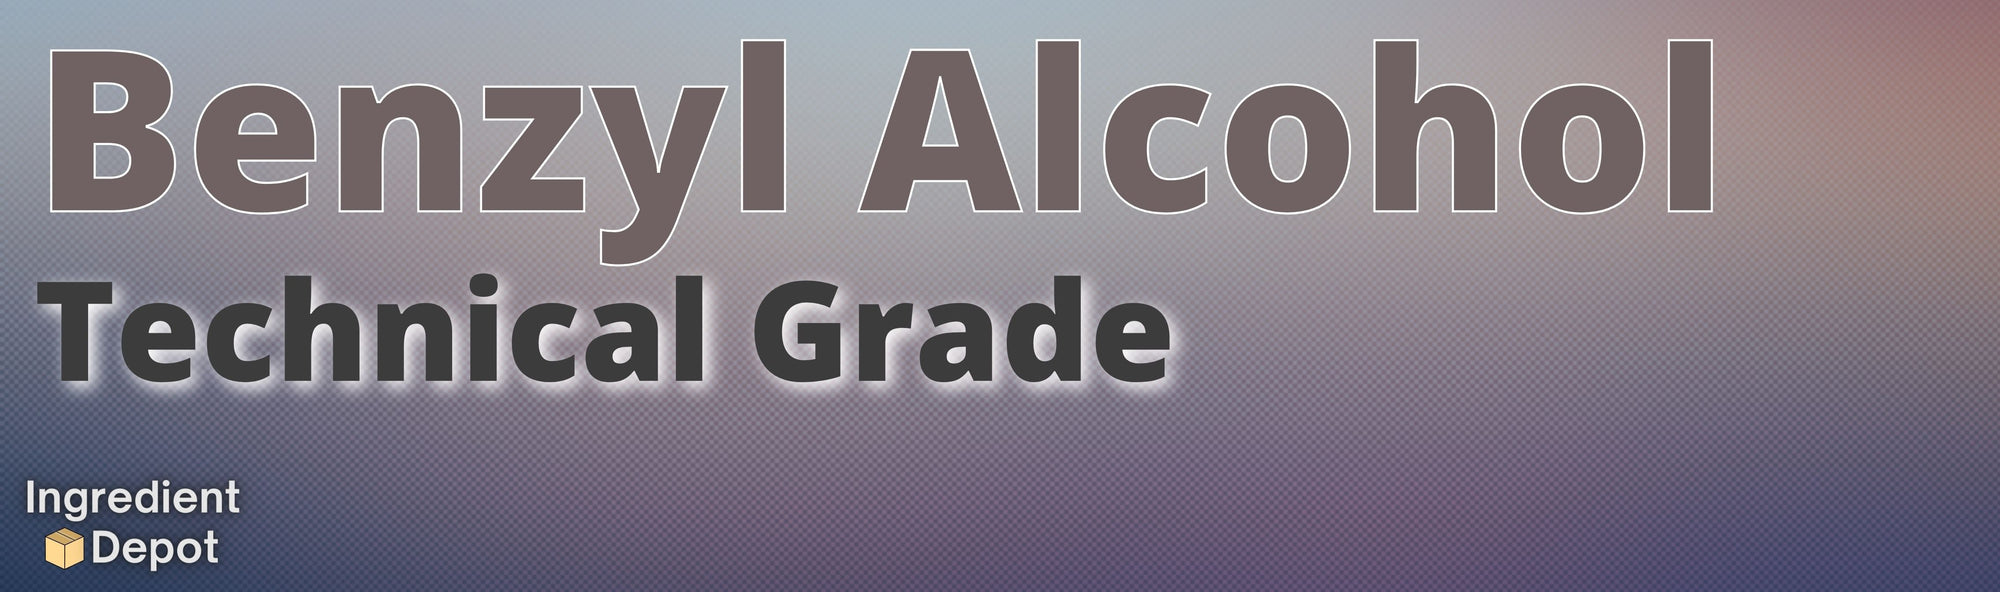 Ingredient Depot Benzyl Alcohol Technical Grade